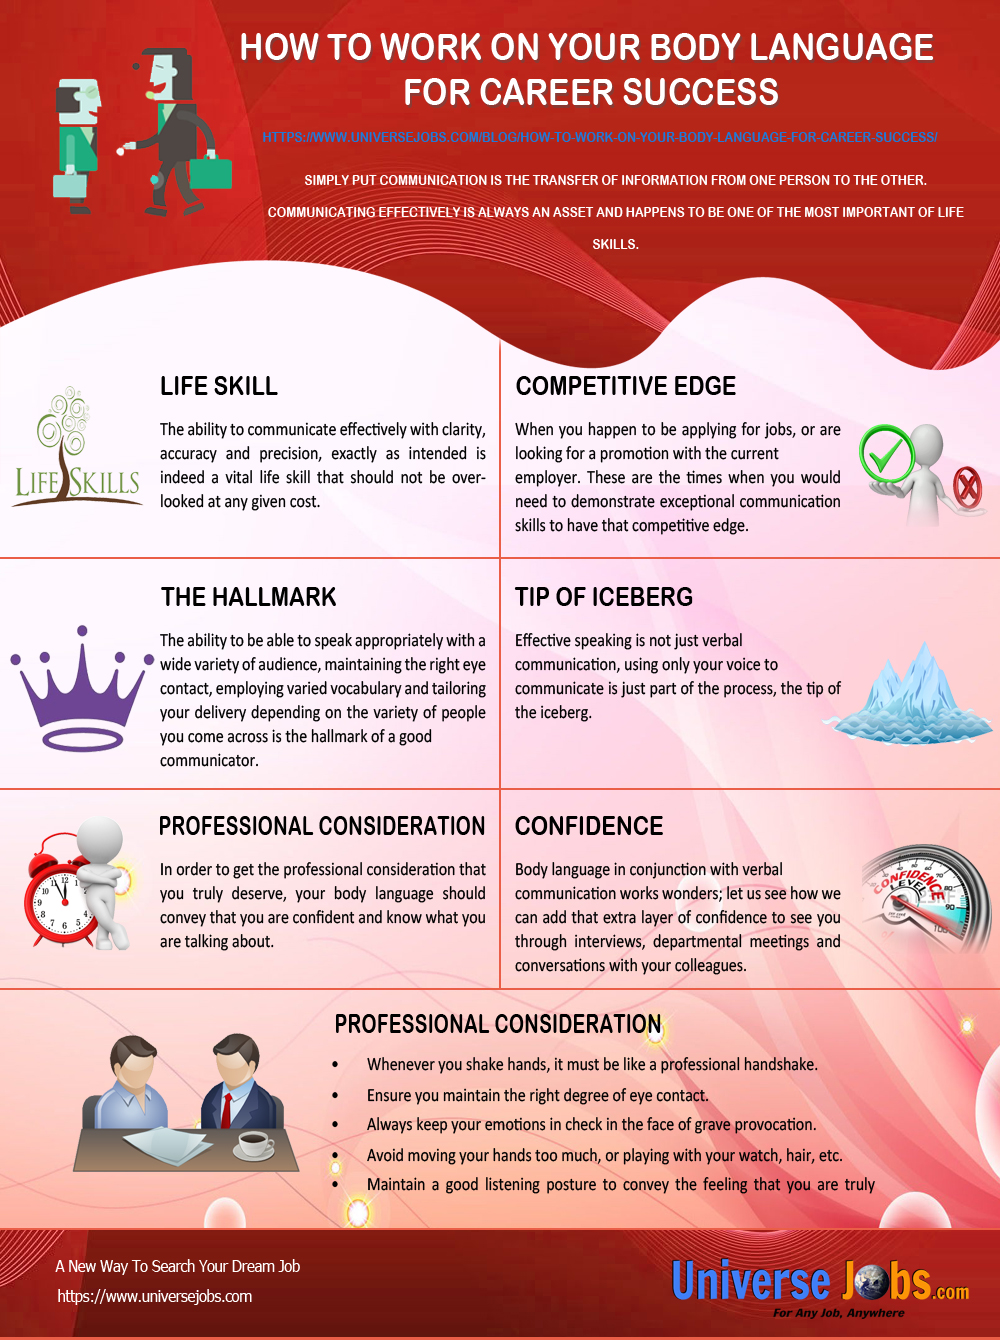 How To Work On Your Body Language For Career Success (Info-Graphics)